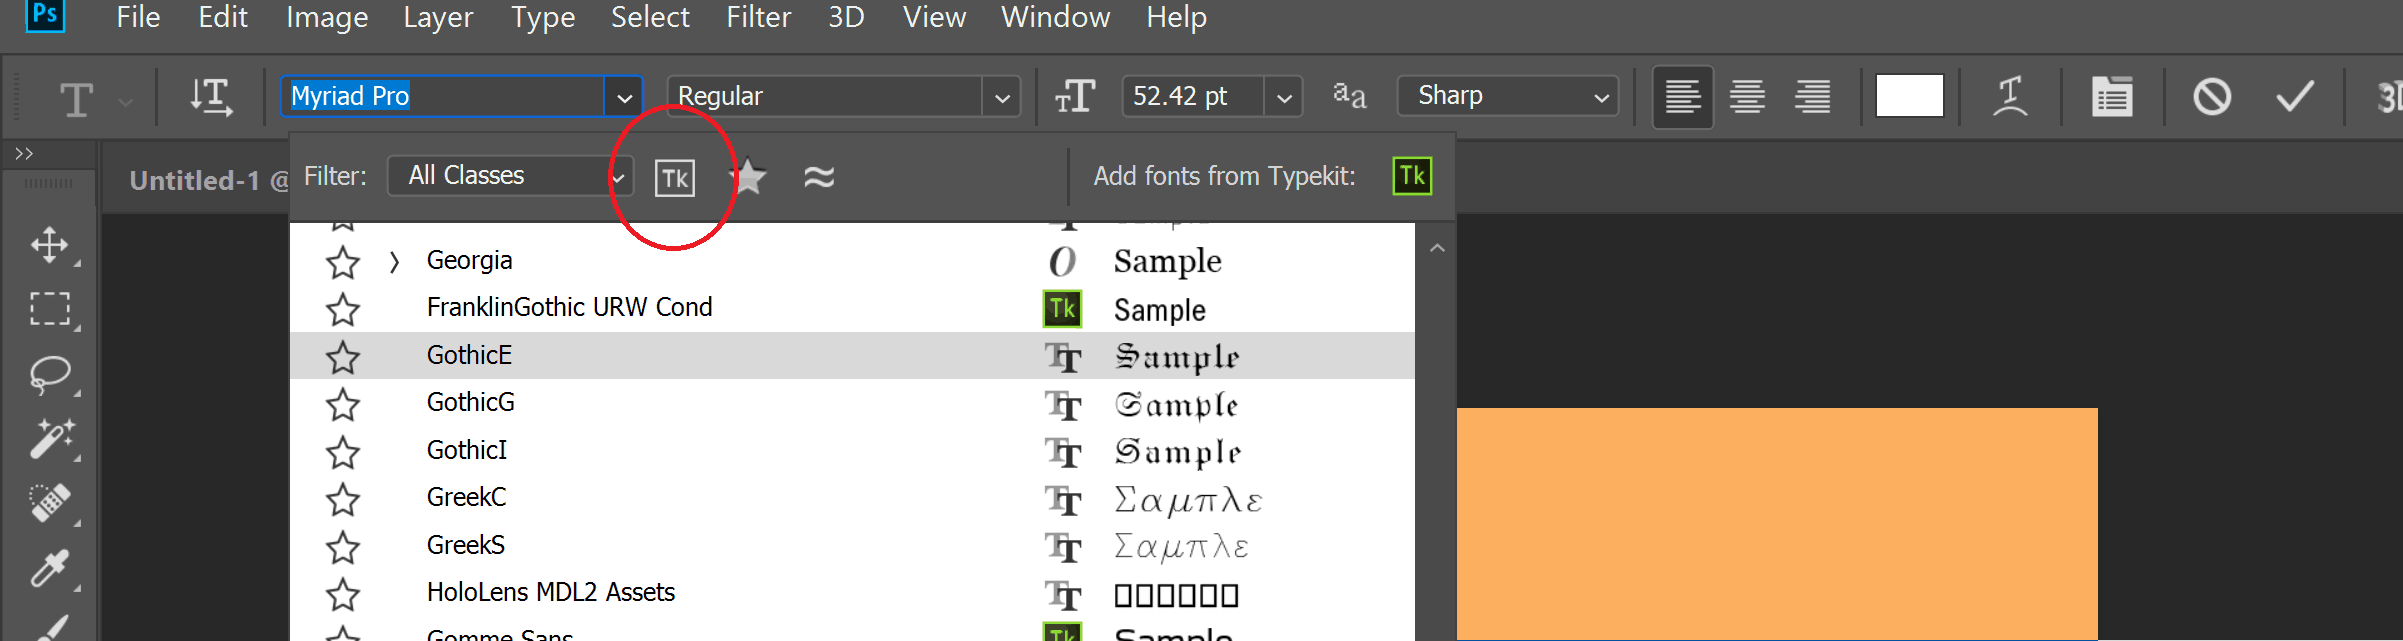 how to add fonts to photoshop with typekit